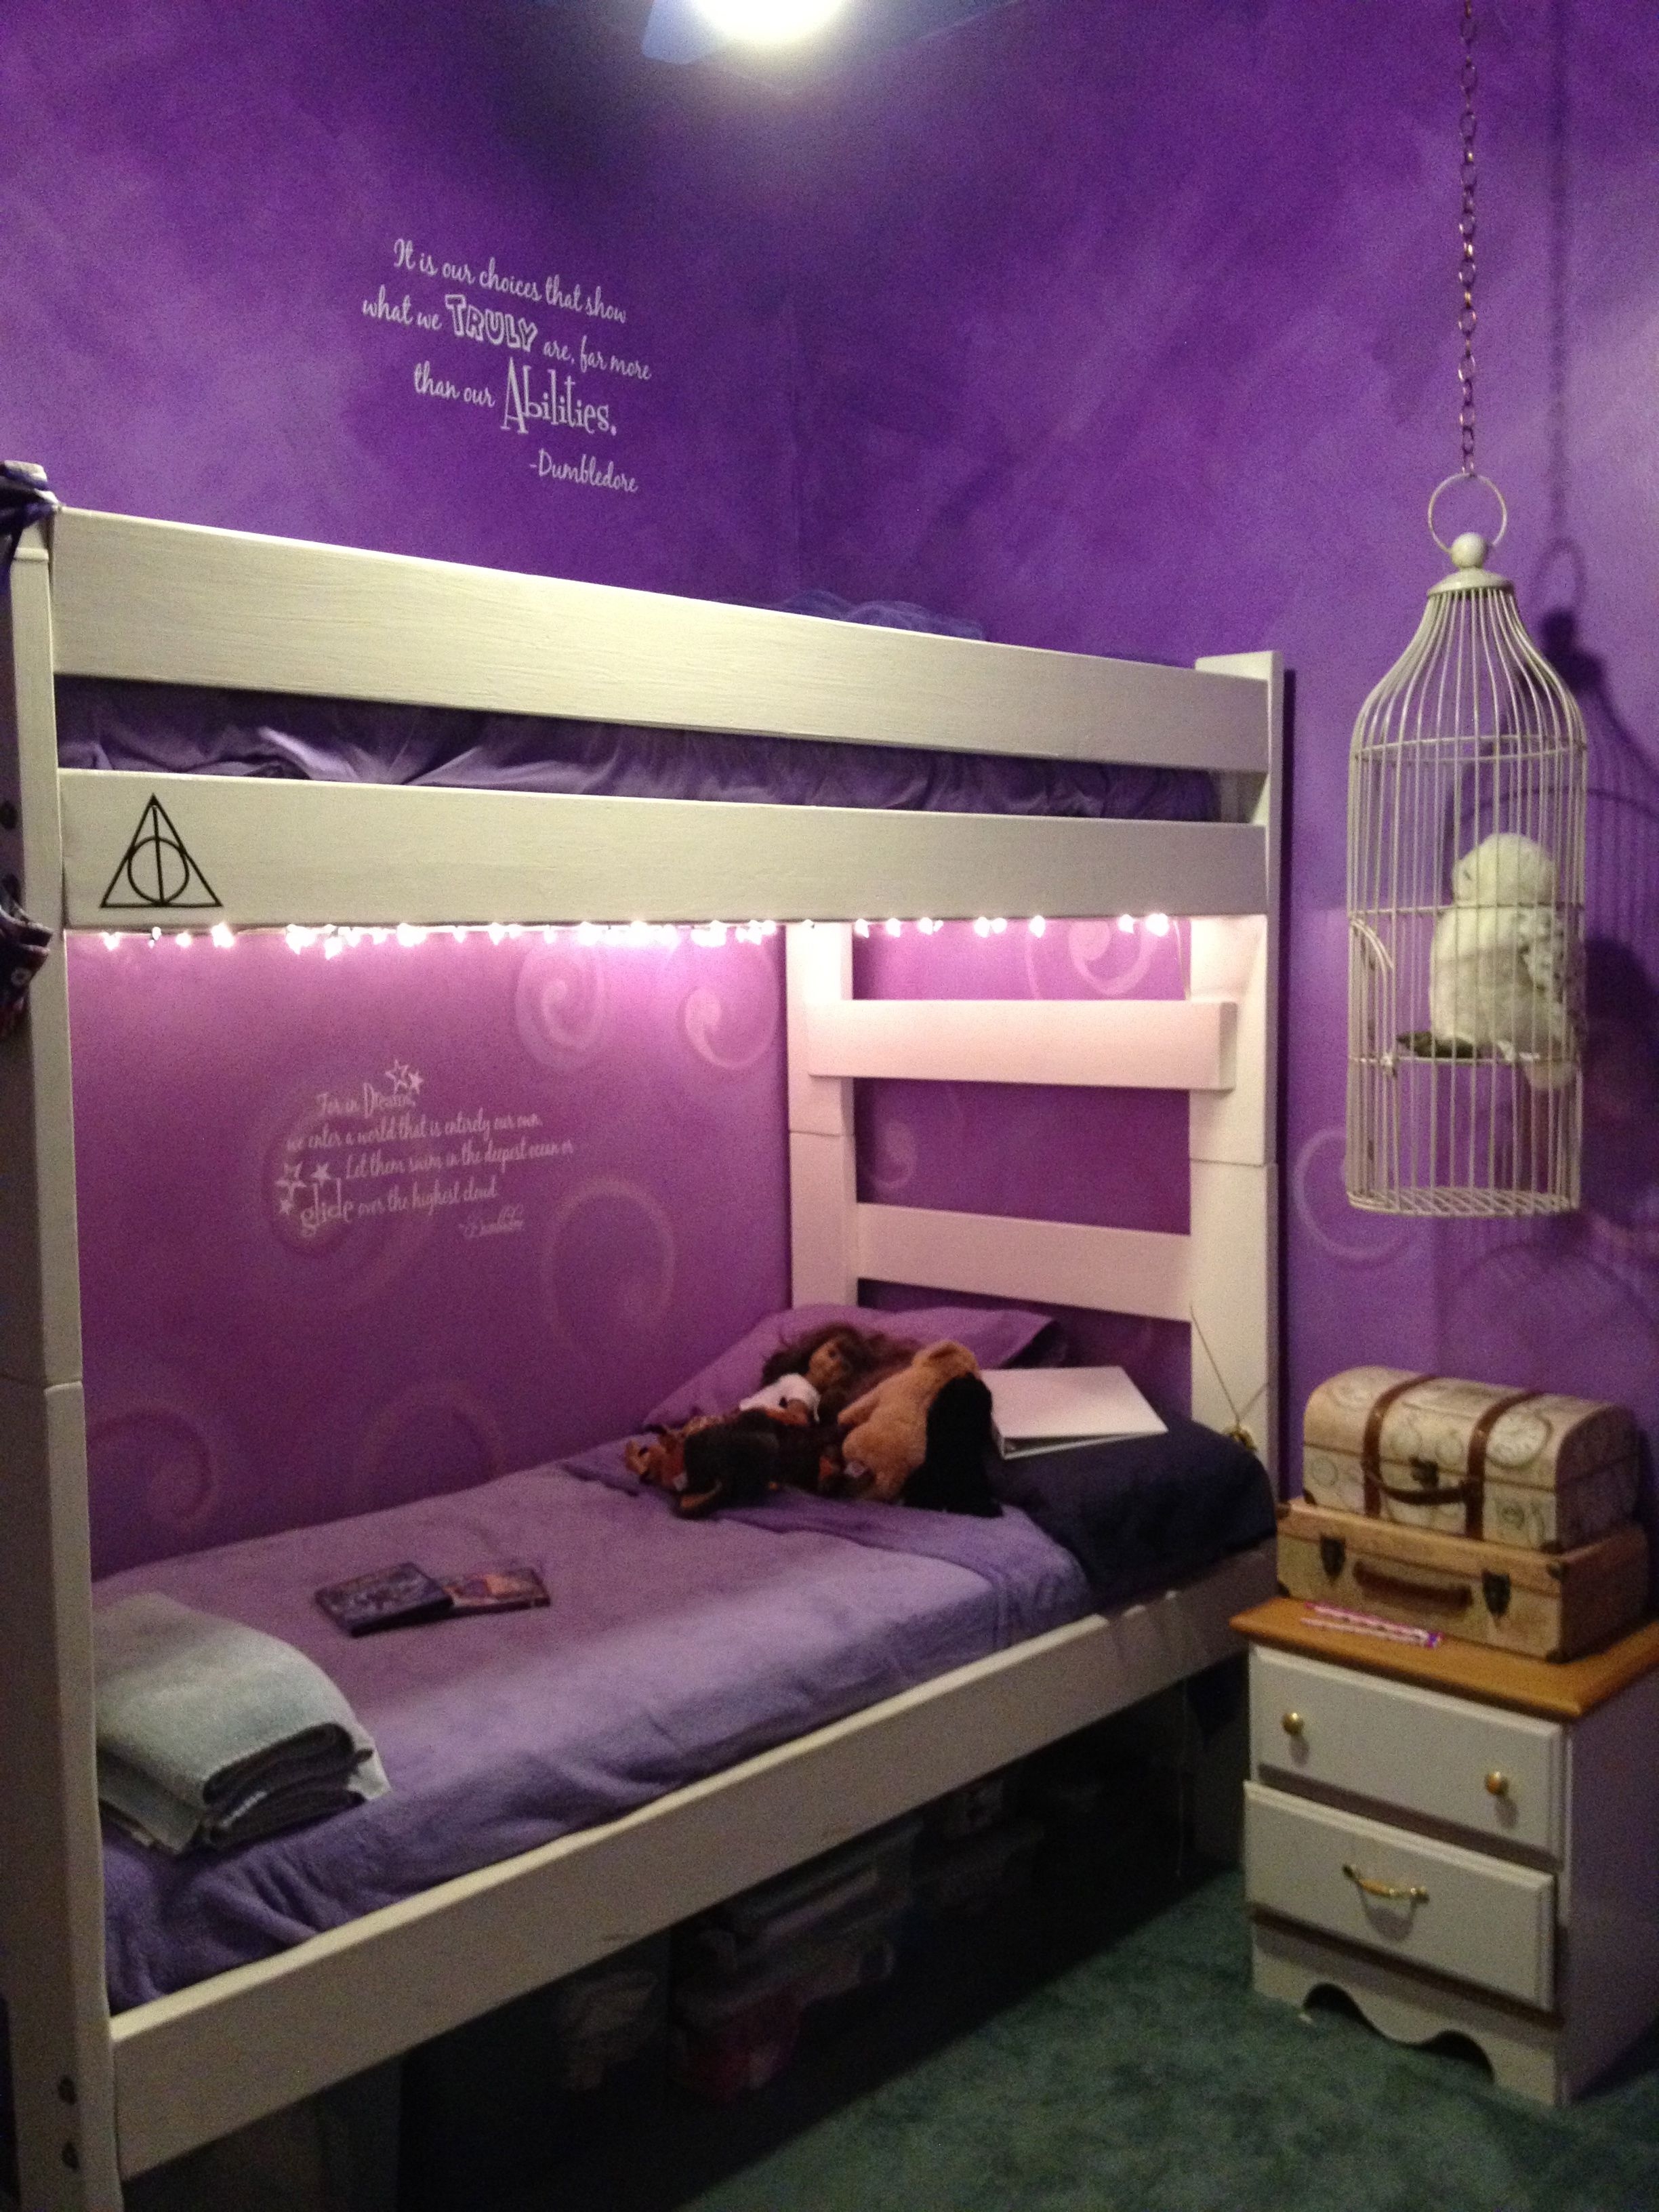 10 Ideas to Create Your Own DIY Harry Potter Decor Bedroom - Classy Mommy